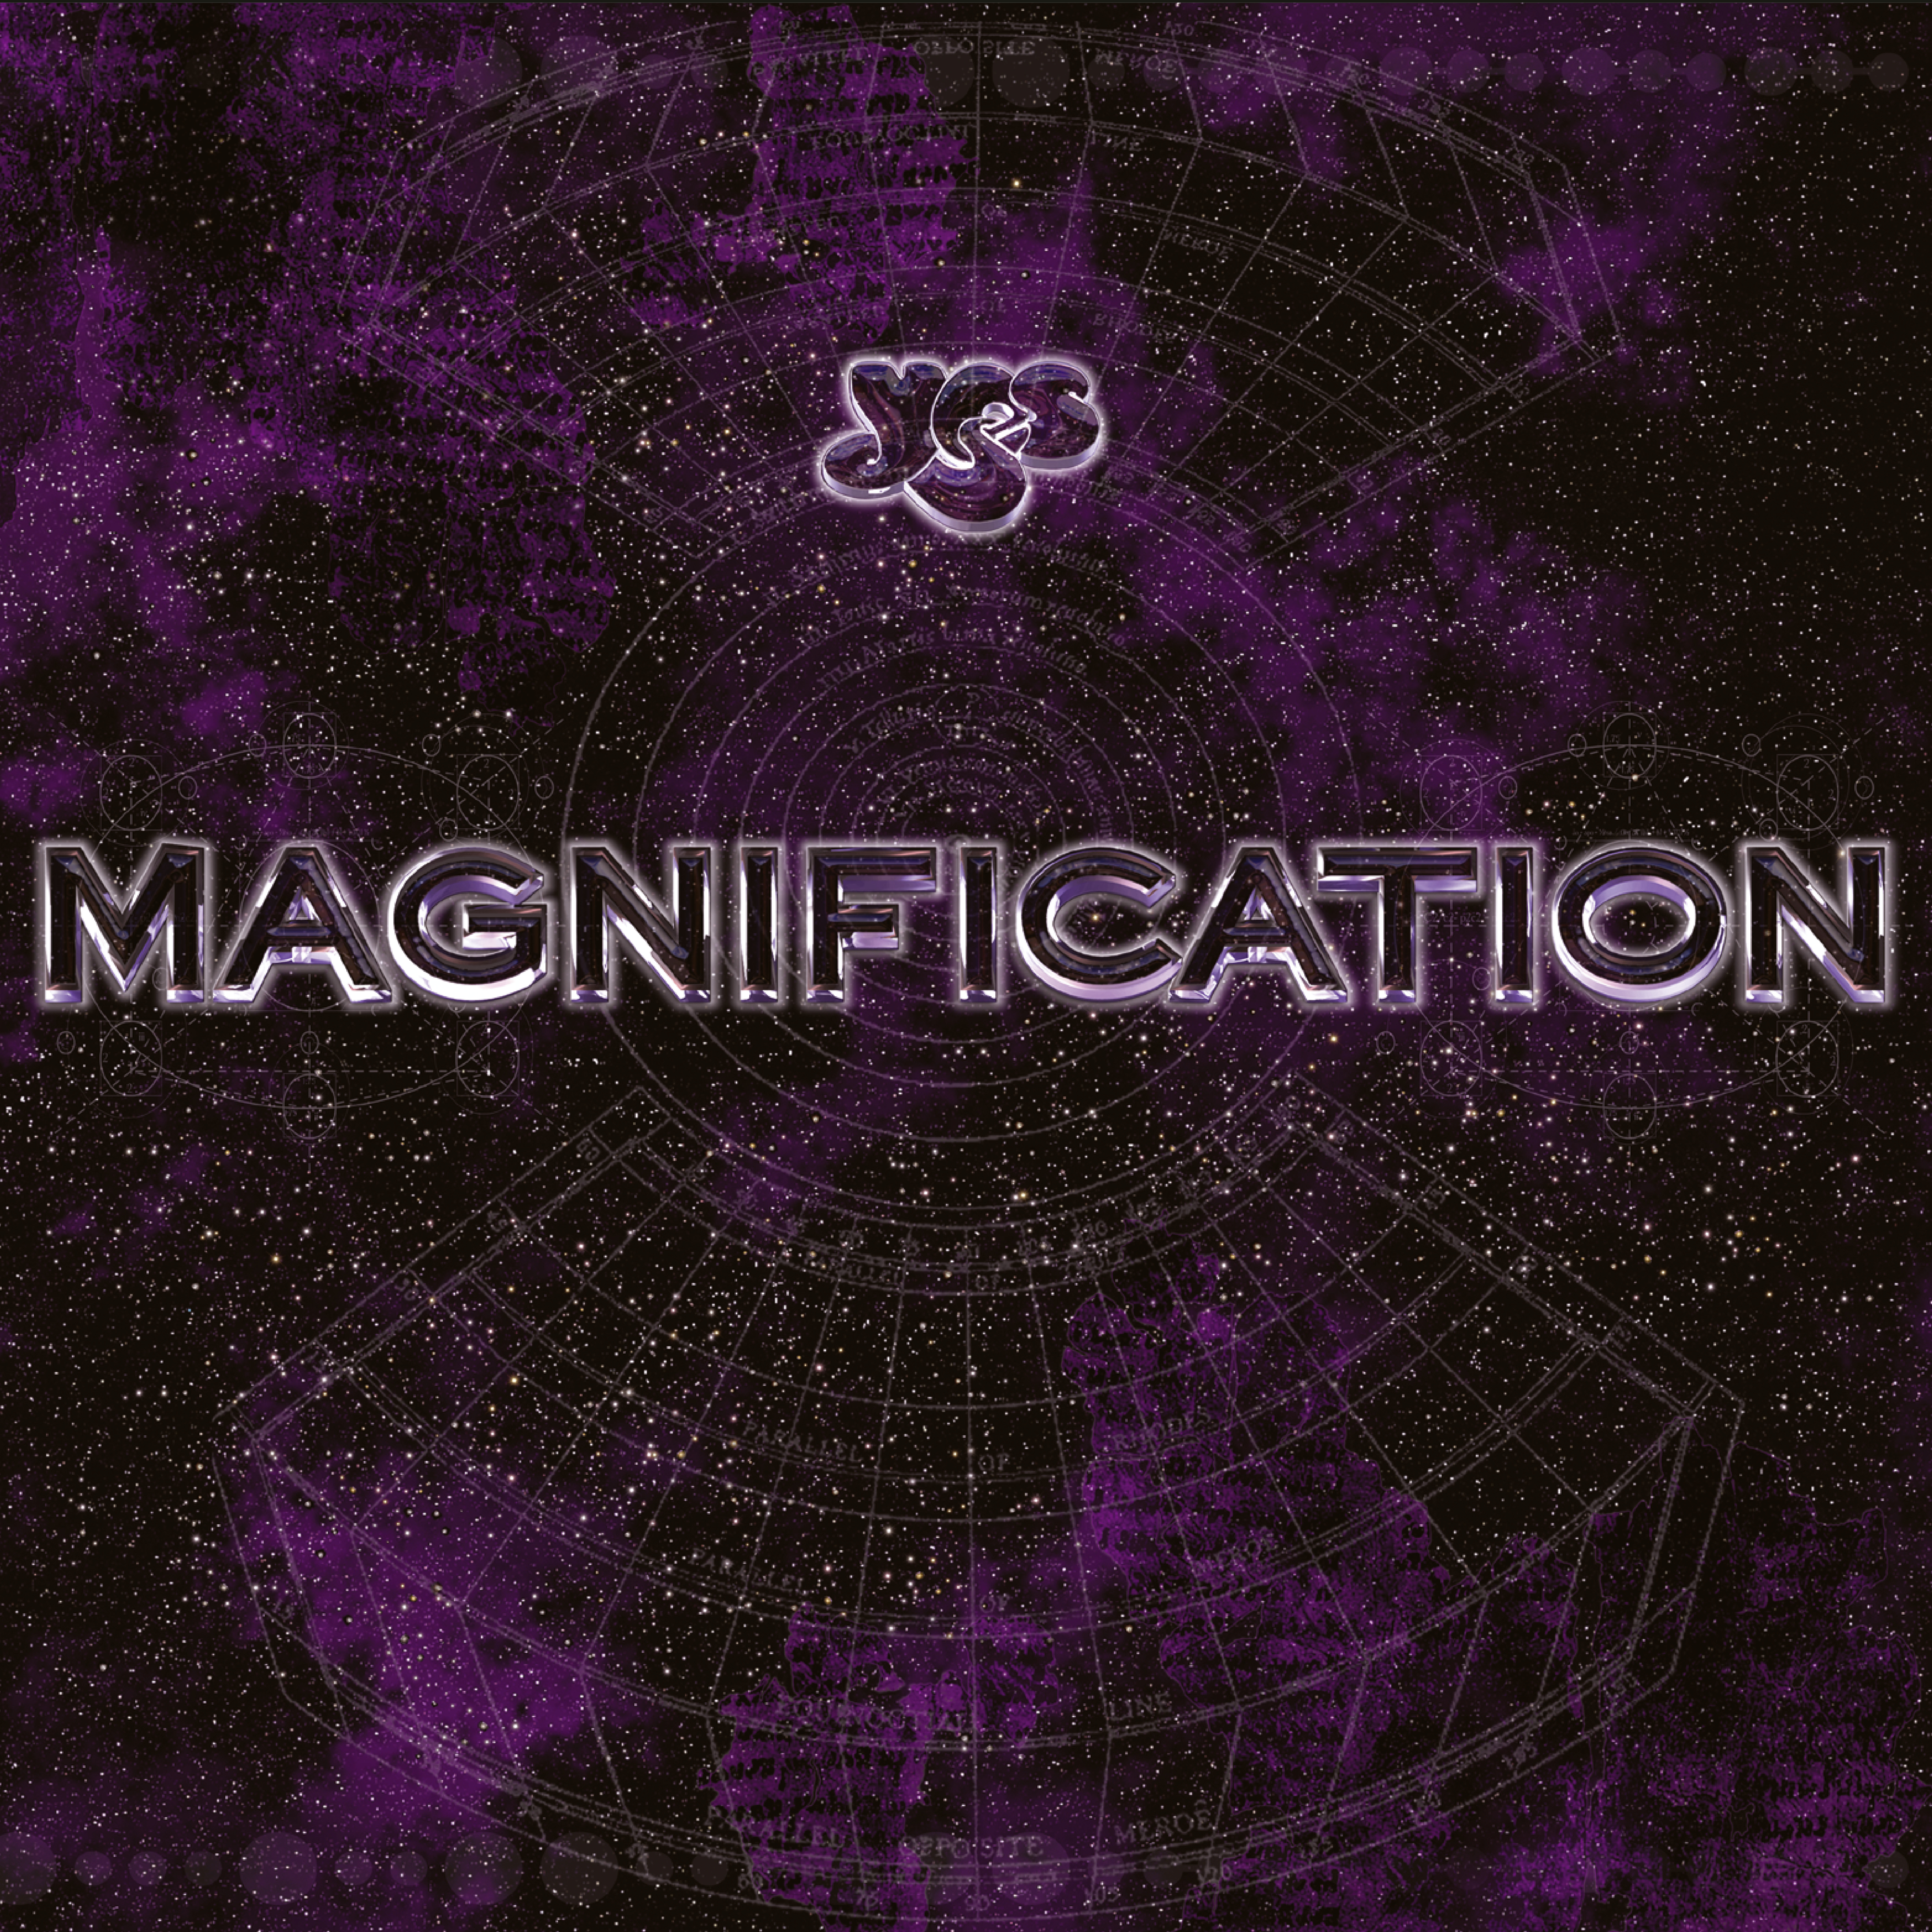 Yes - Magnification - CD